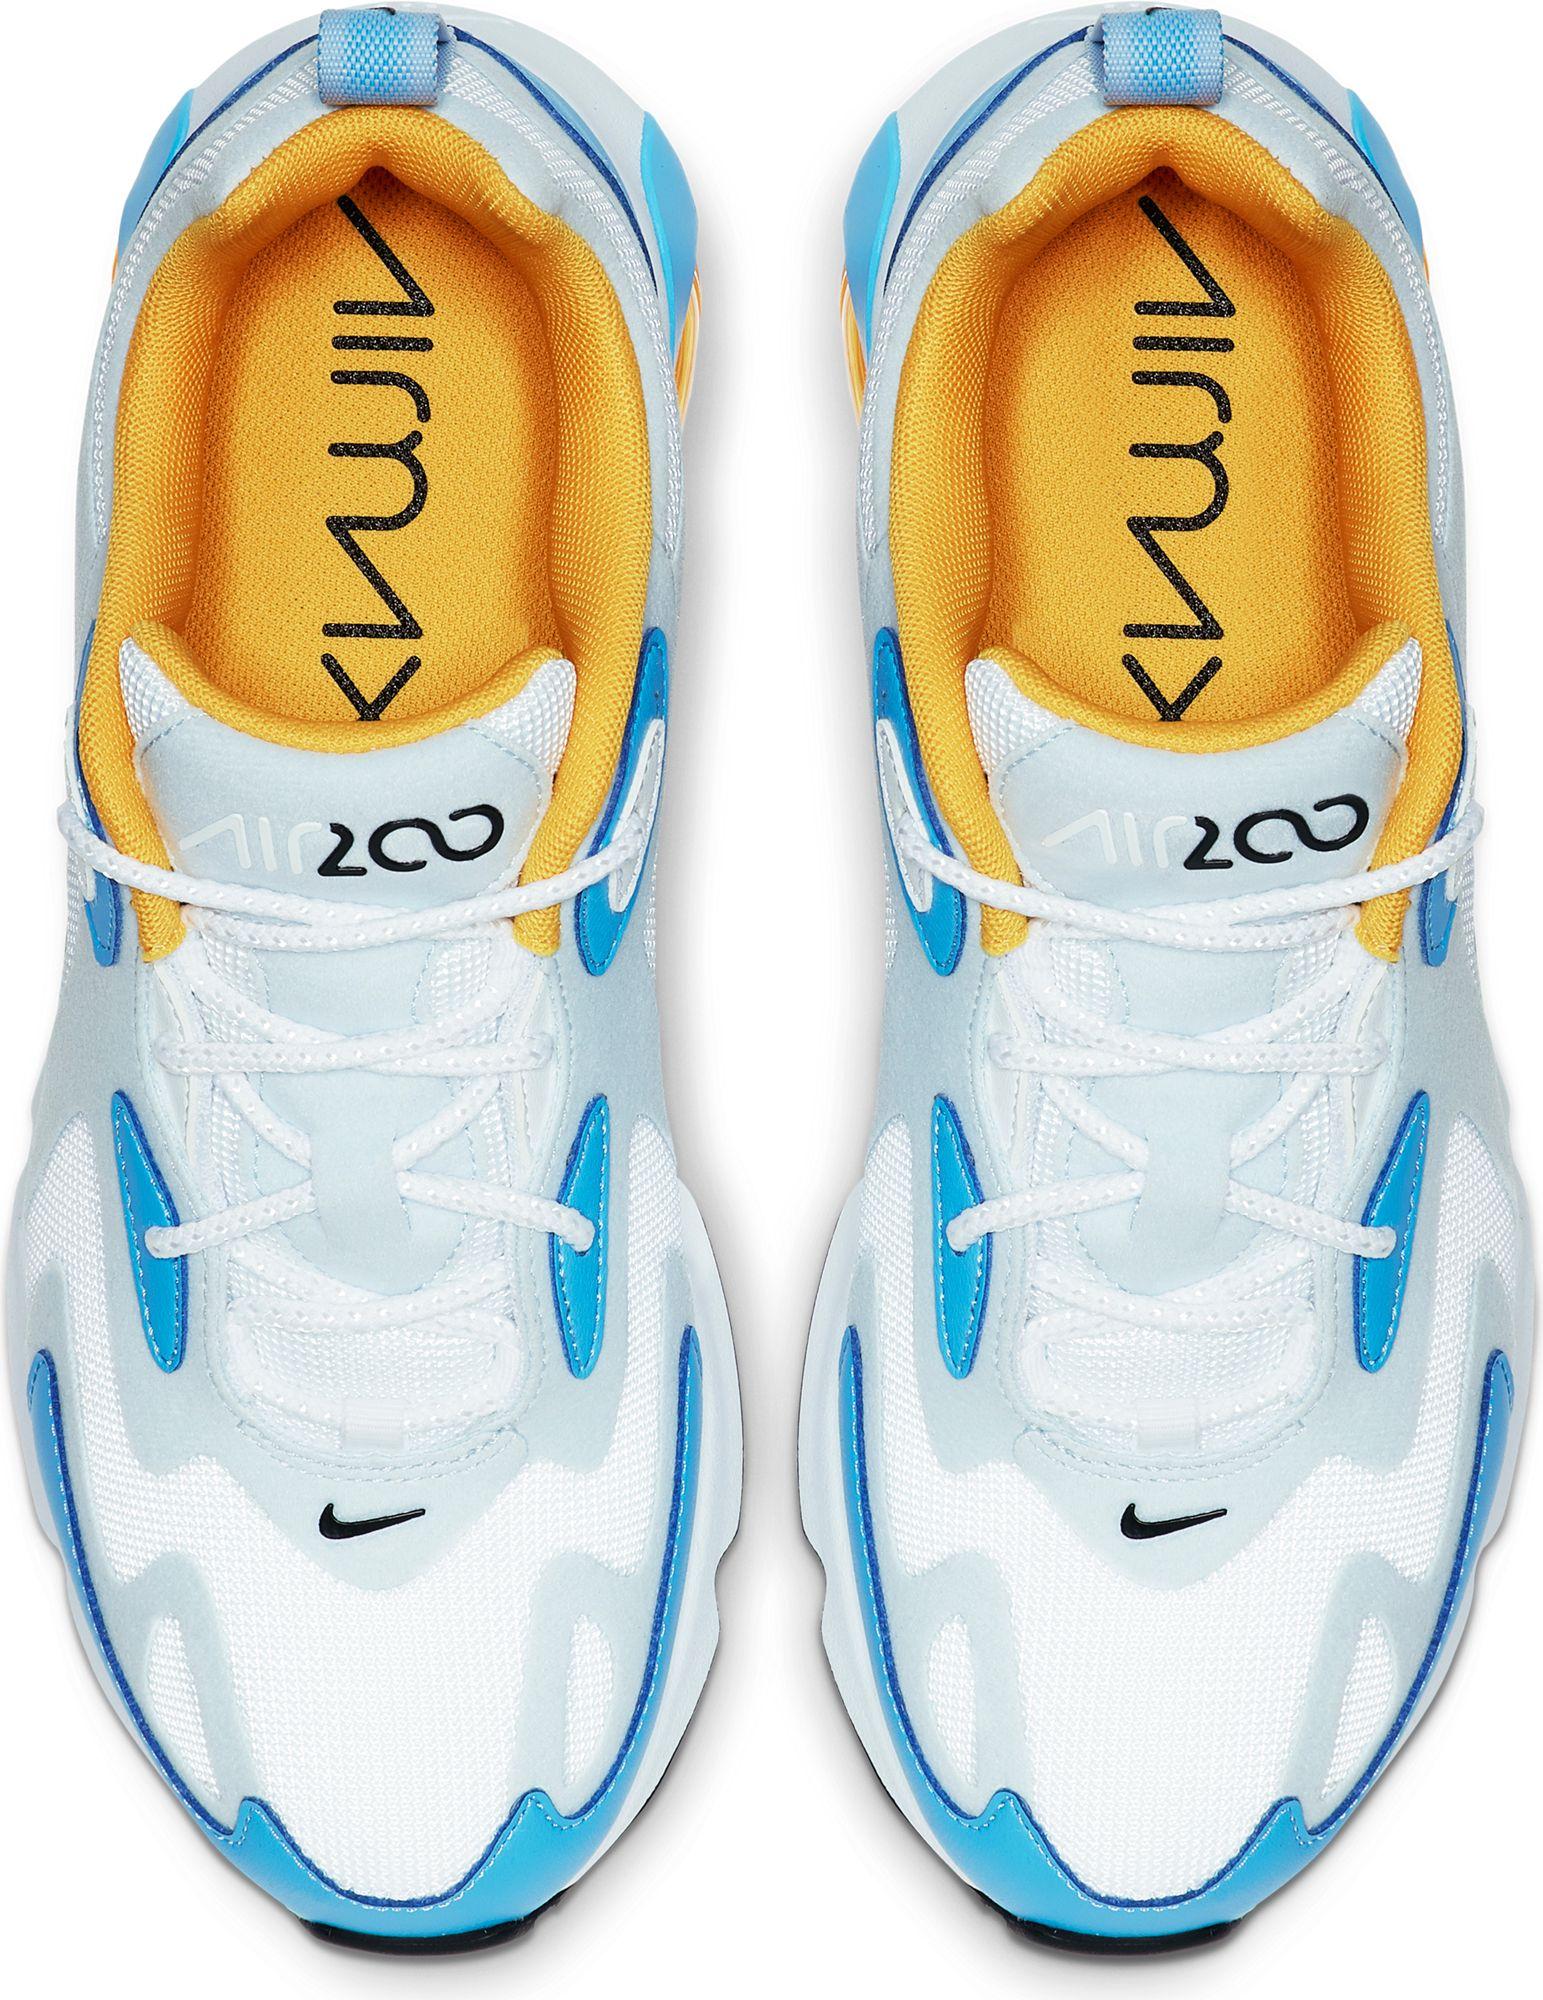 Nike Air Max 200 Shoes in White/Blue 